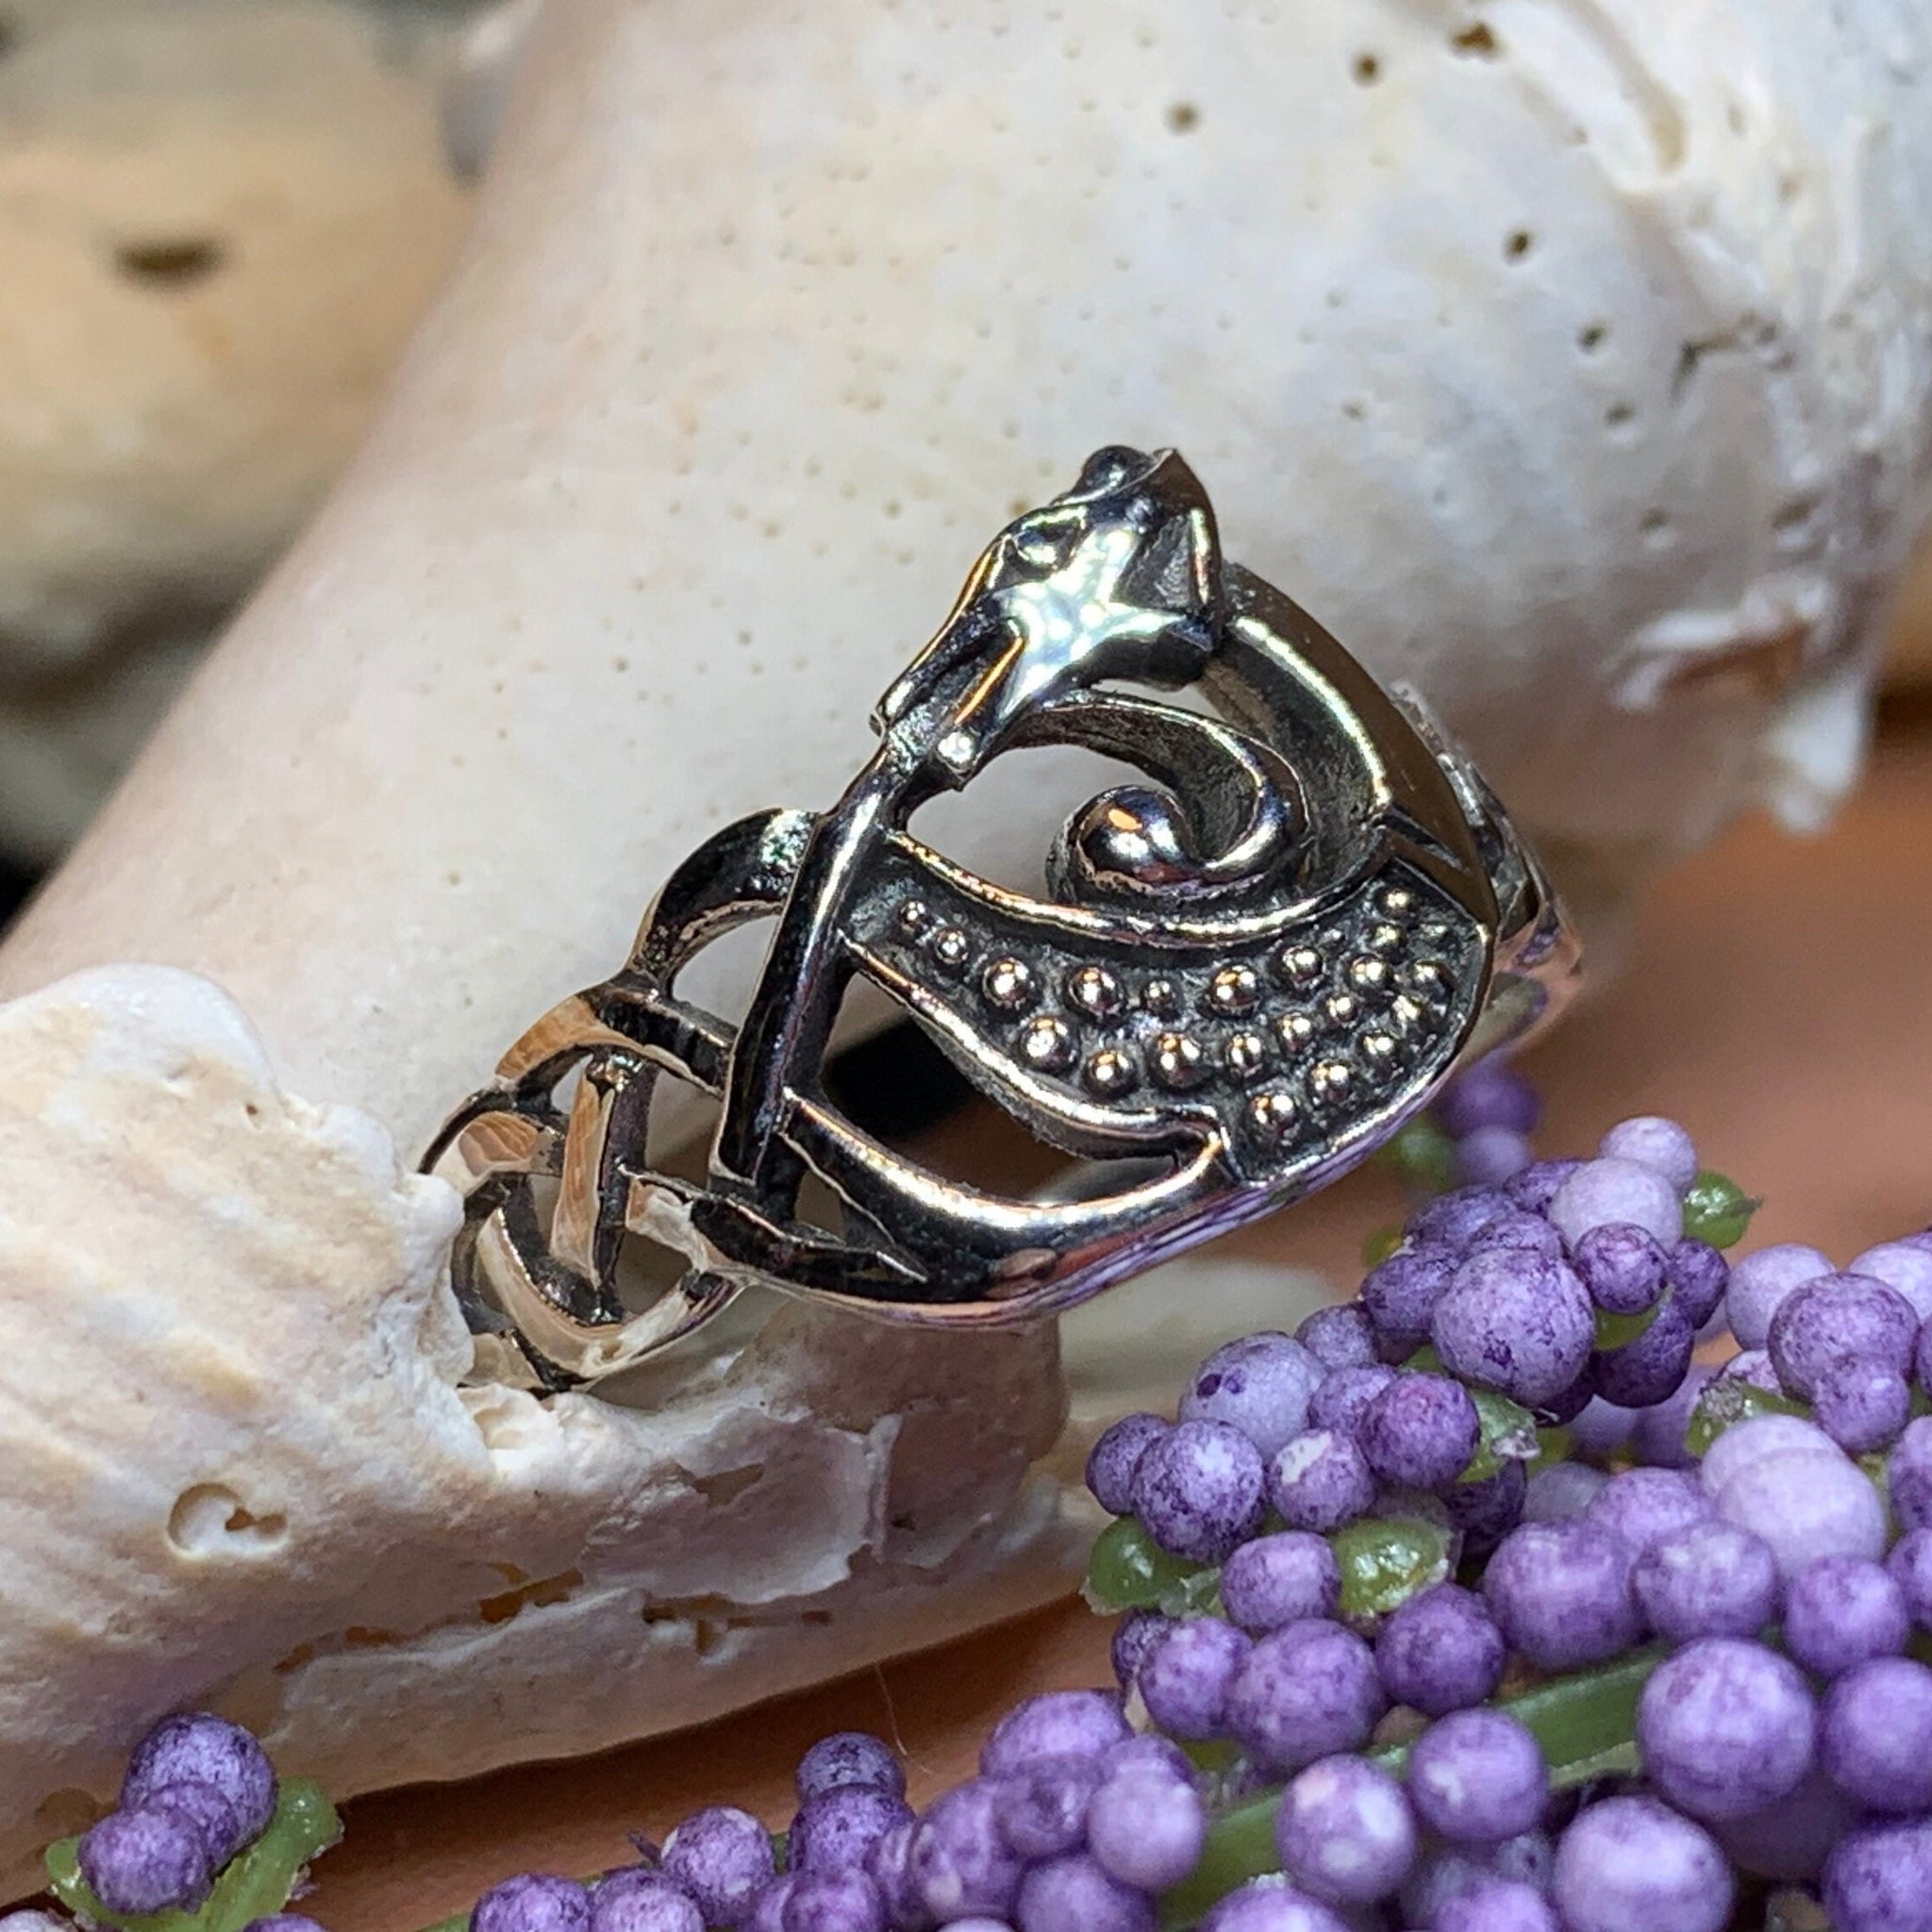 Skyrim Dragon Ring Silver 925 (for men or women) ⋆ Buy online - $179.00 |  Sterling silver jewelry rings, Rings, Dragon ring